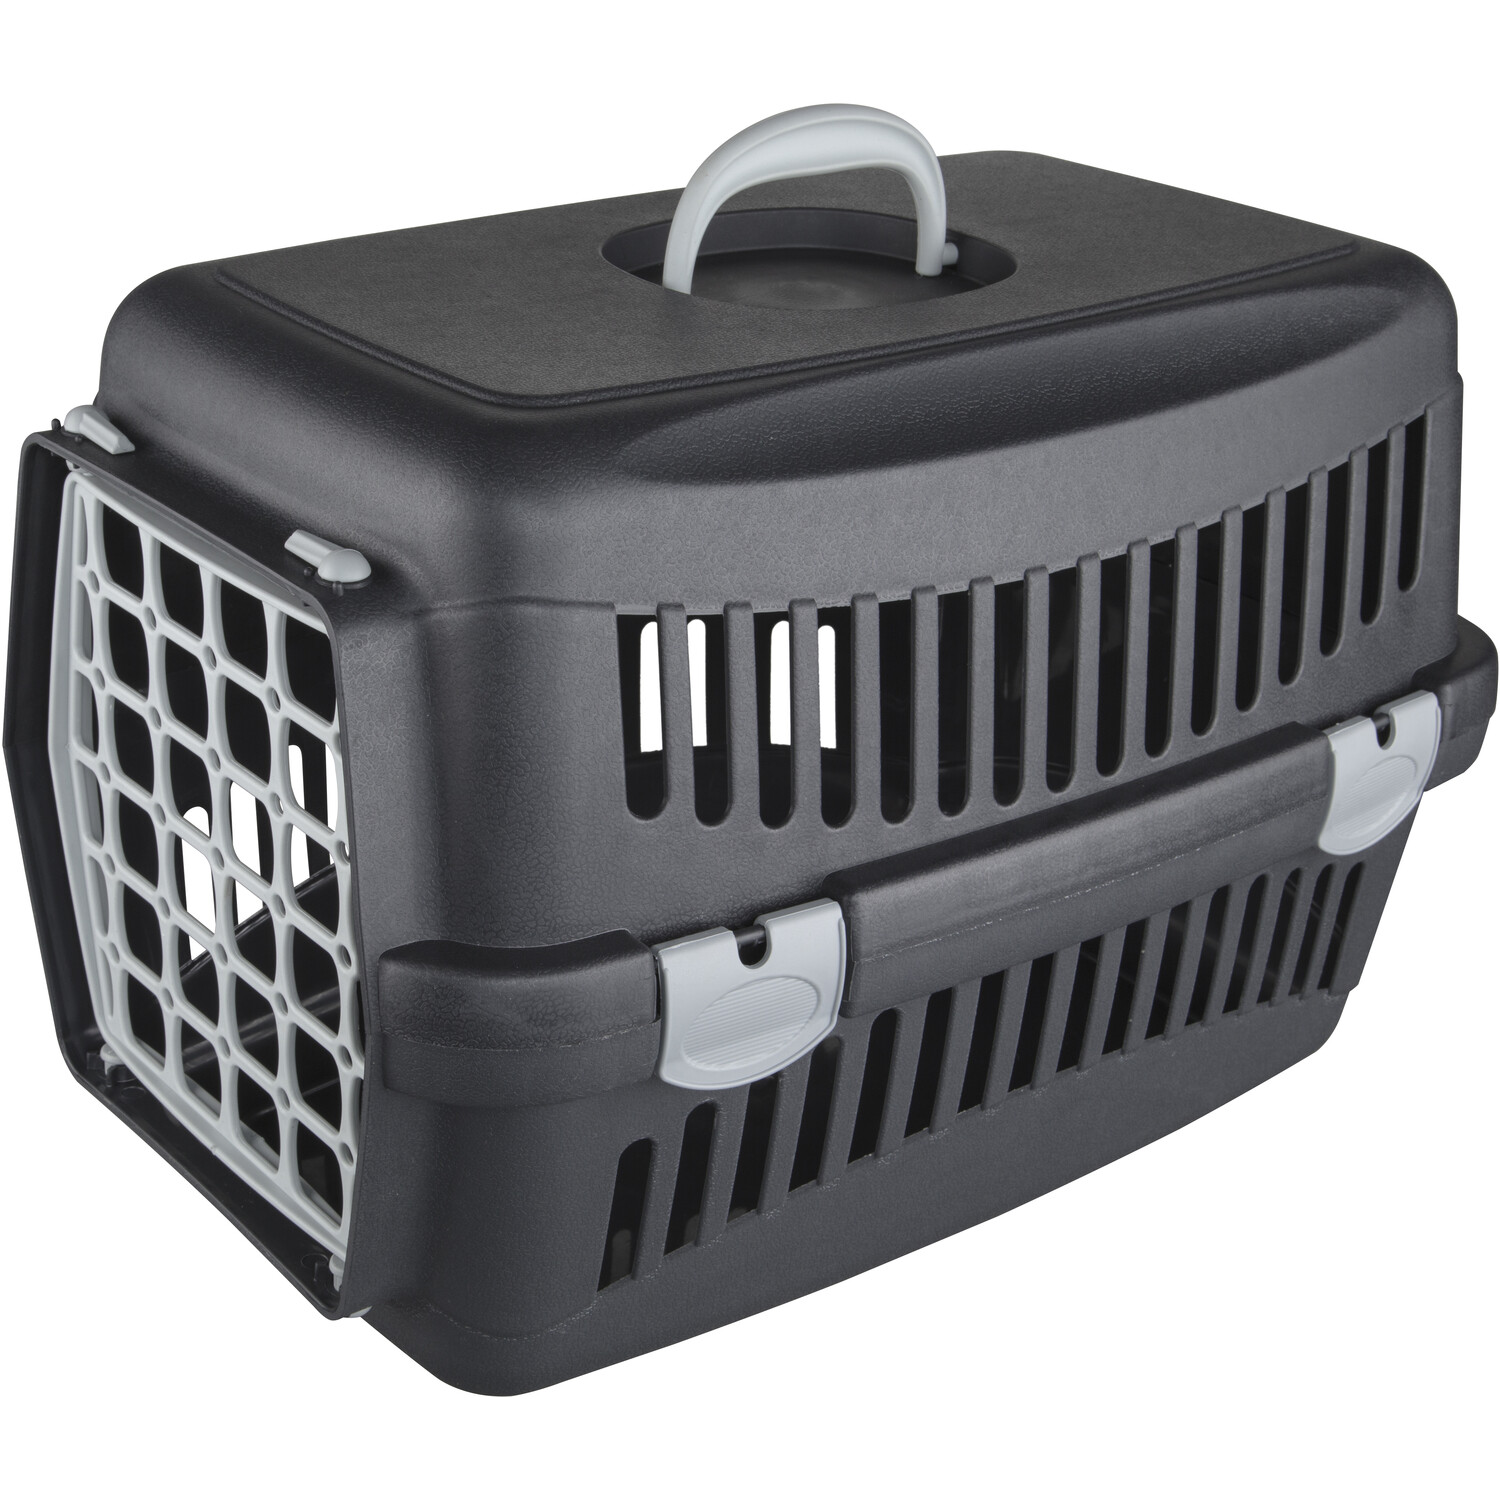 Small Travel Pet Carrier Image 1